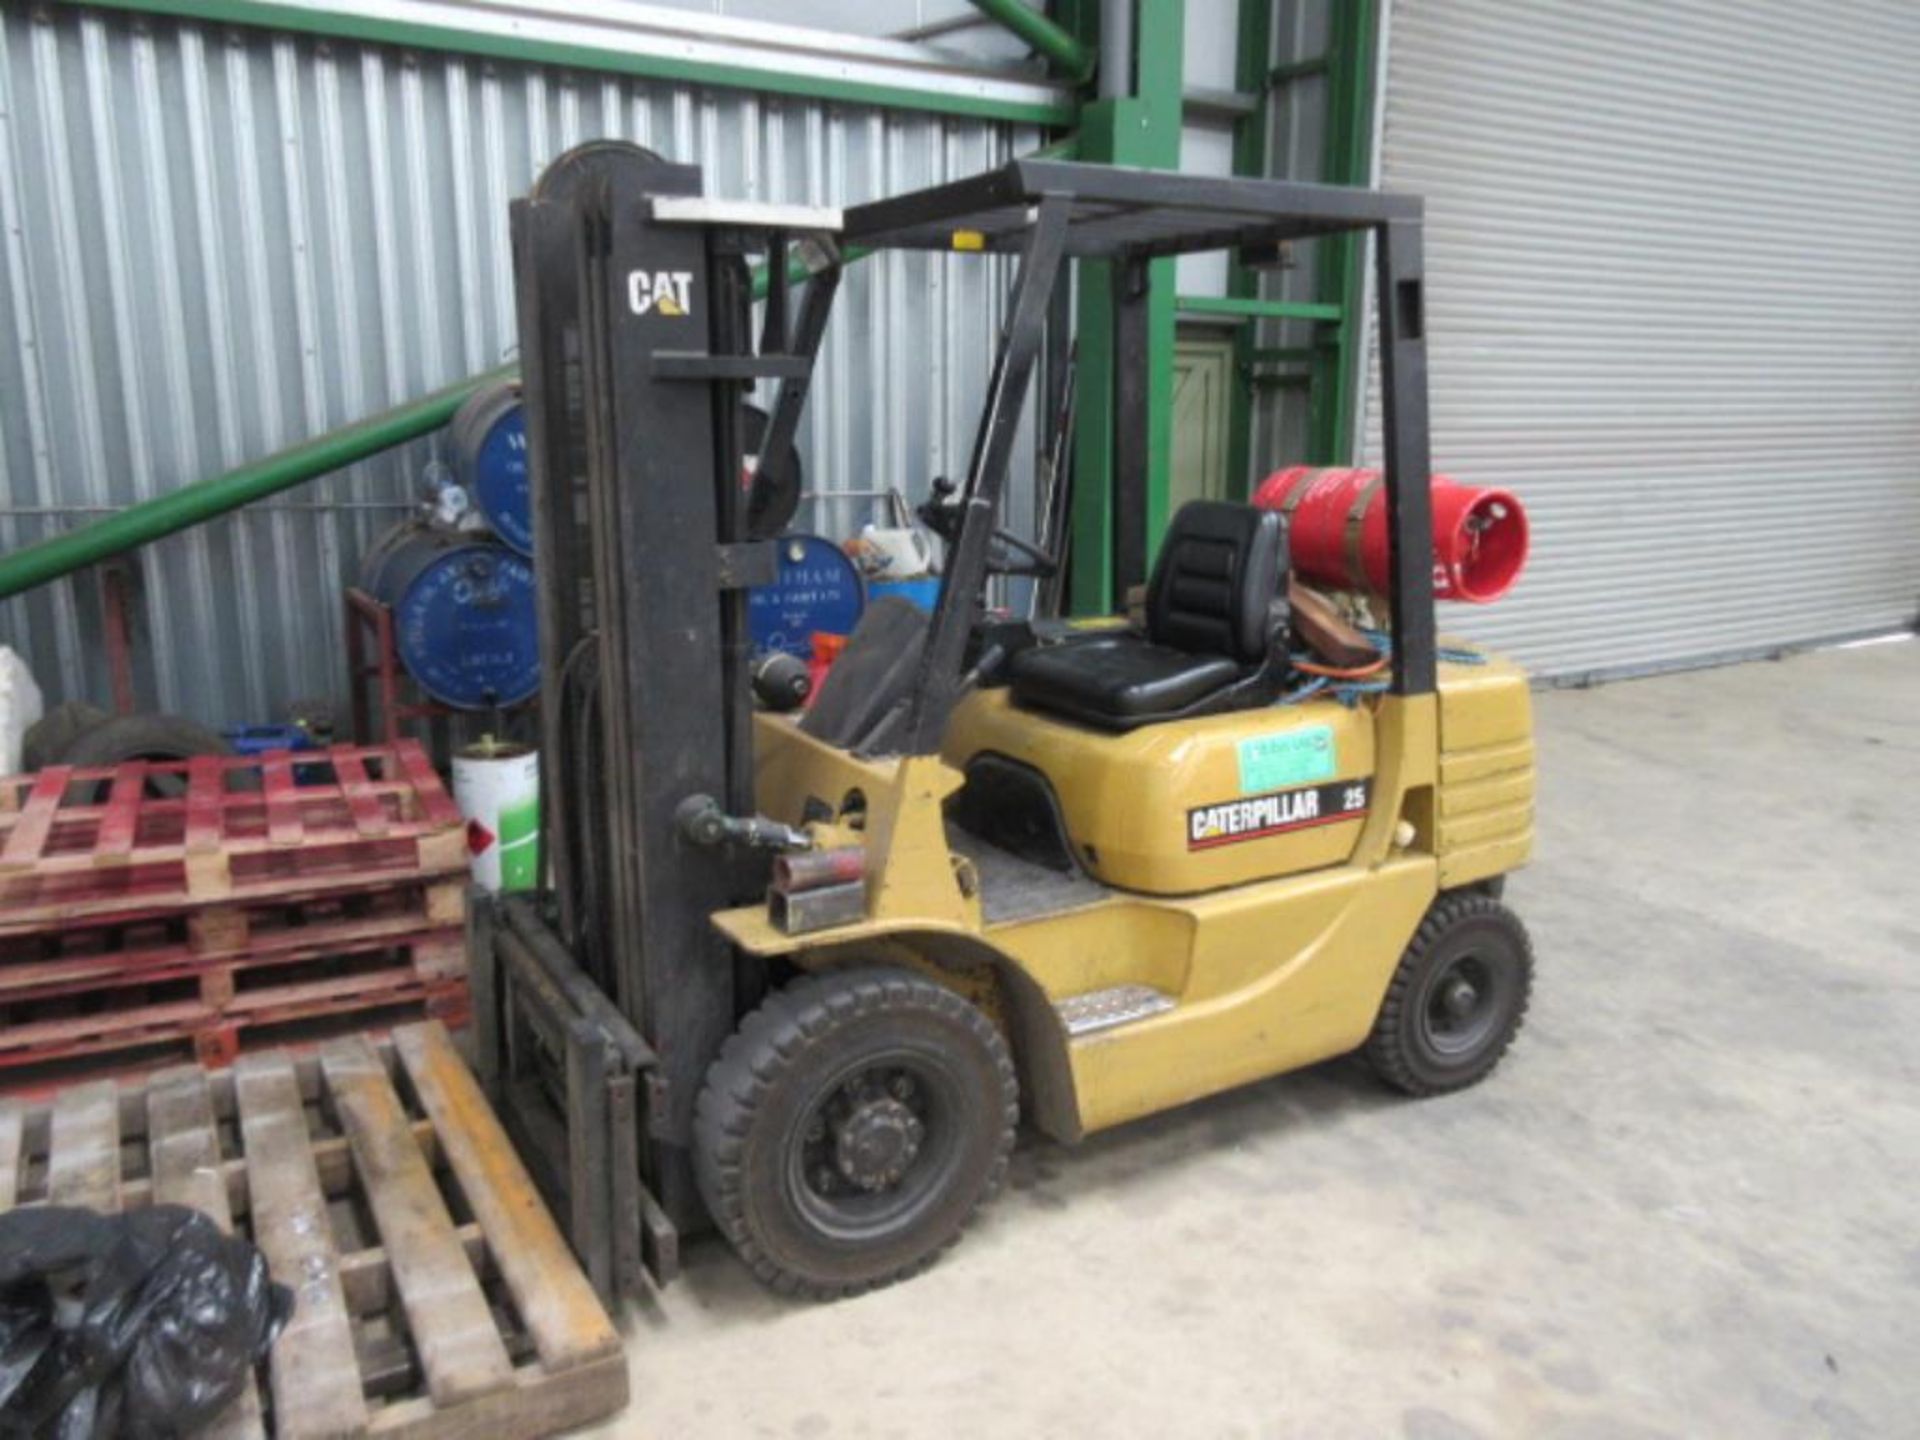 WITHDRAWN 1995 Caterpillar GP25 2.5tonne gas forklift with triple mast Hours: 4,040